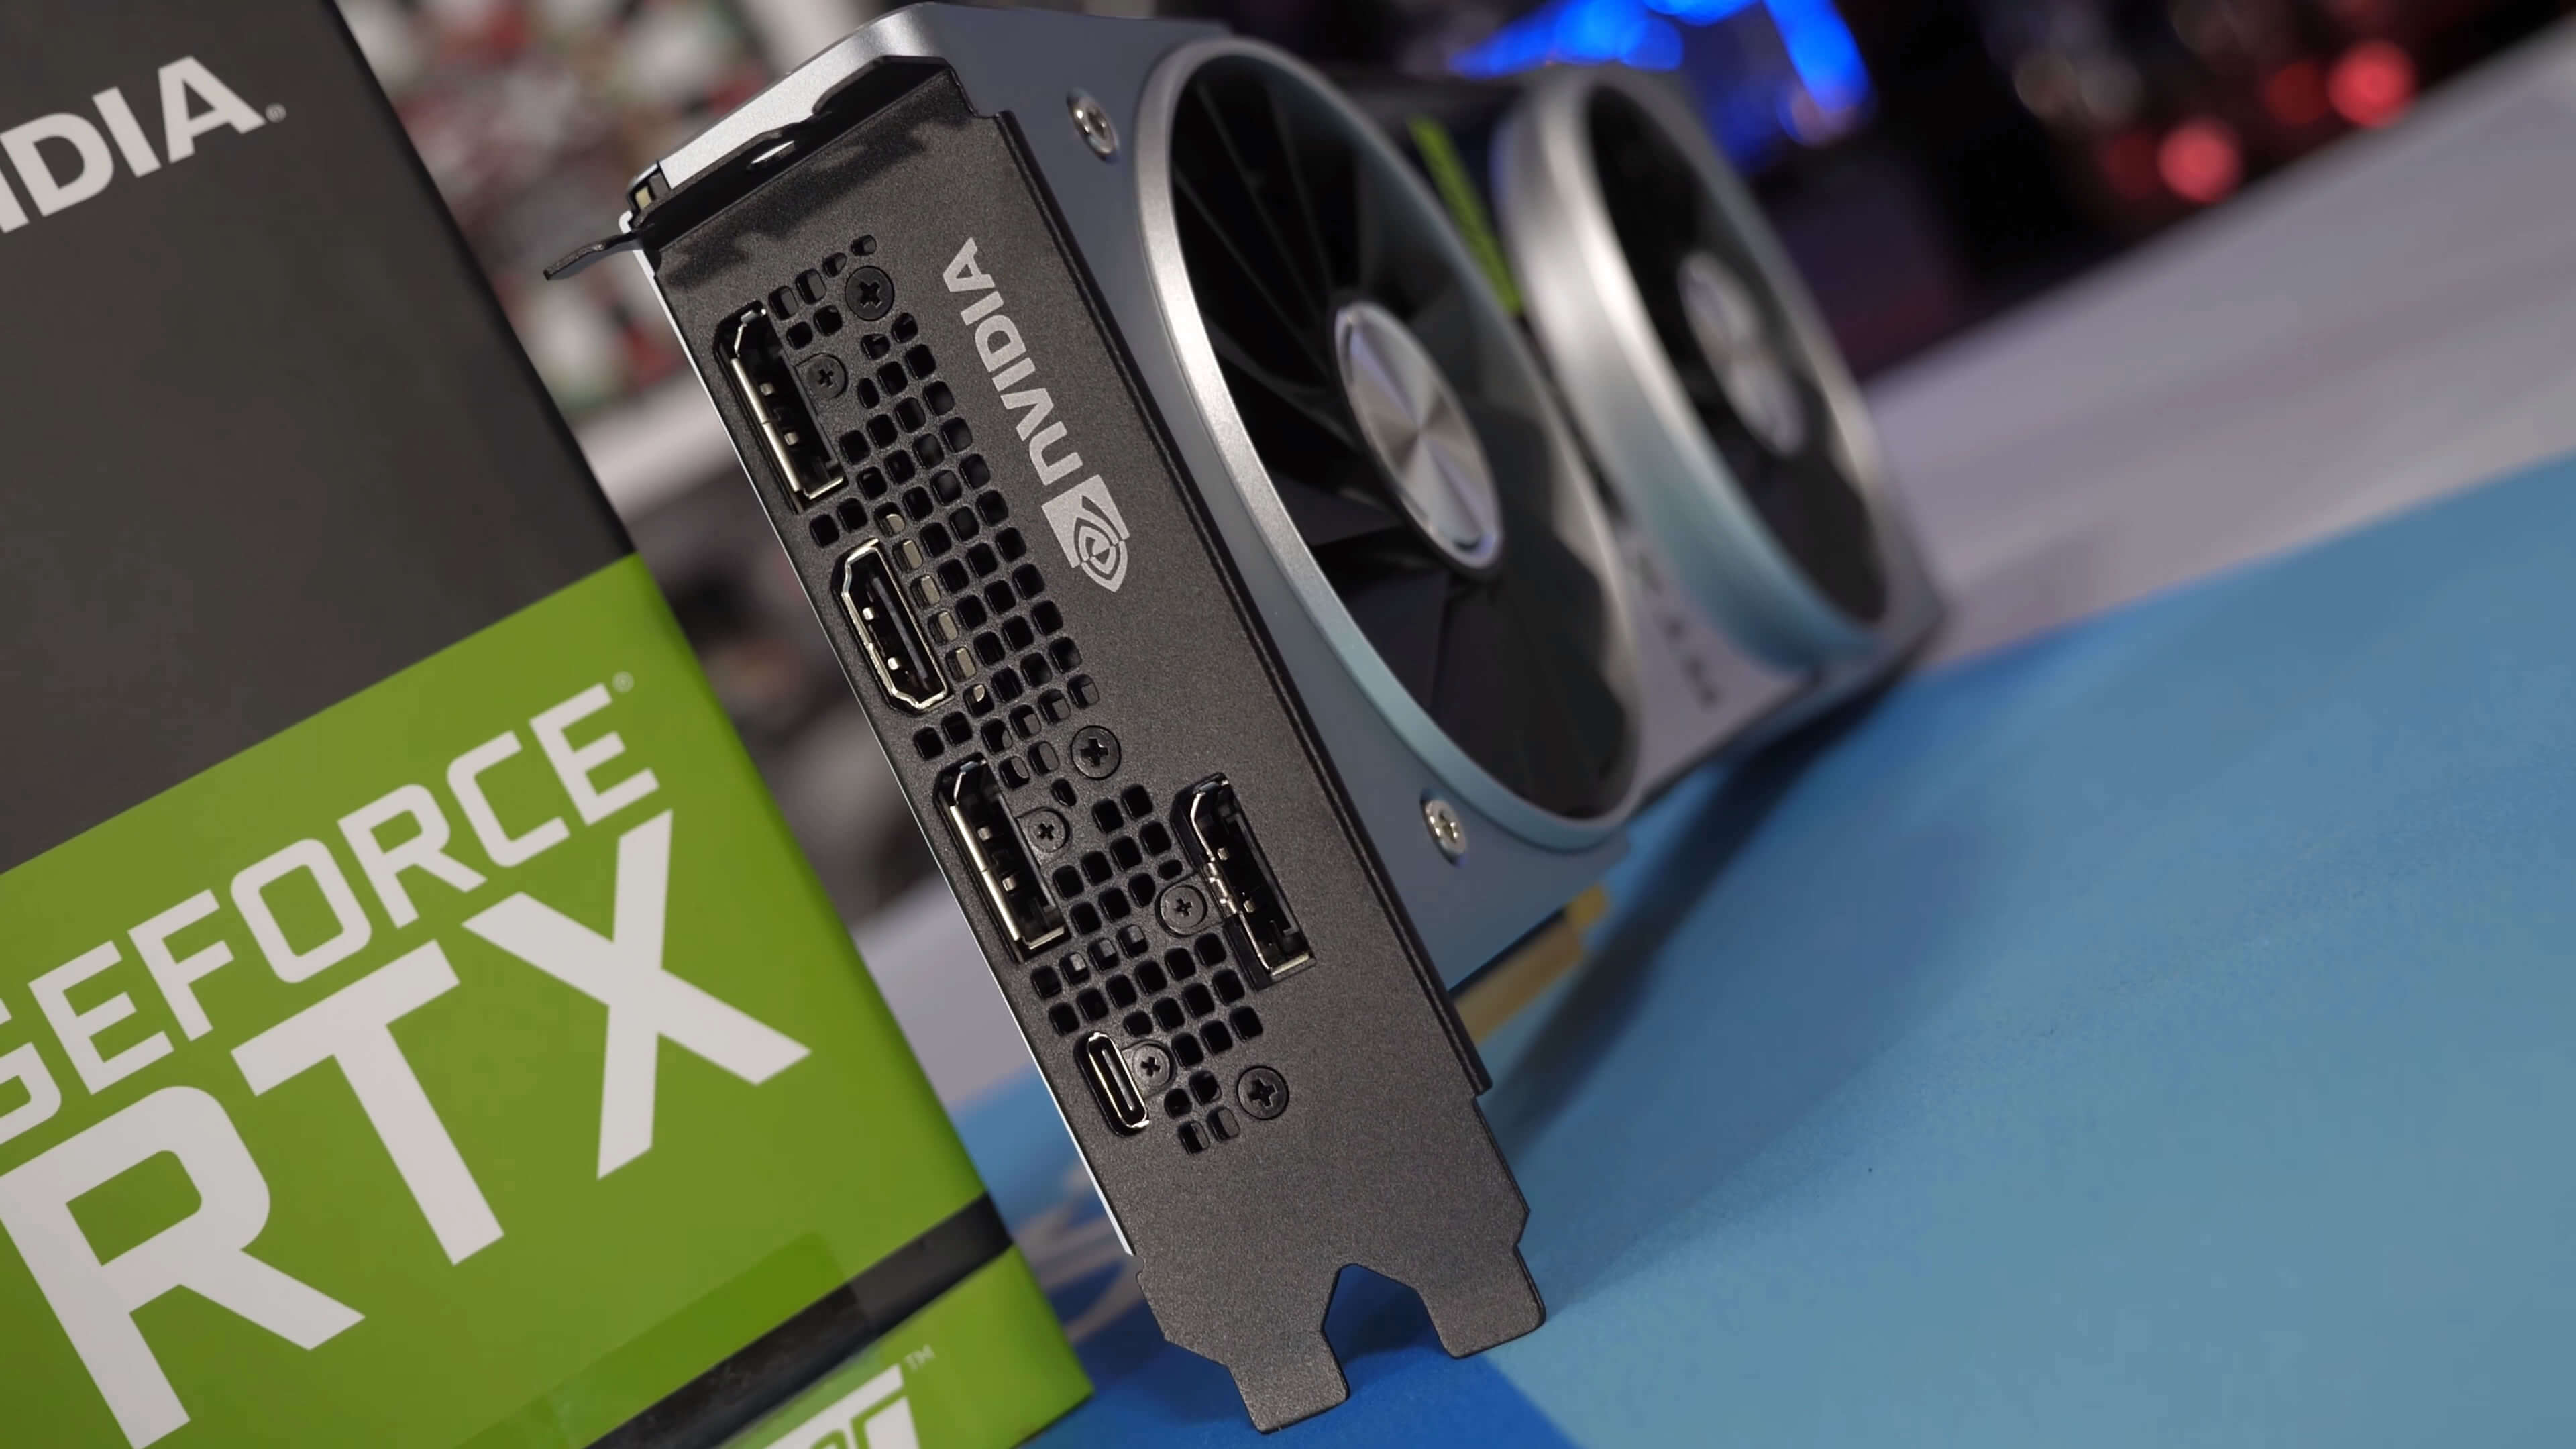 Rumor mill: Nvidia AIB partners clearing stock to prepare for RTX 3000 launch in Q3